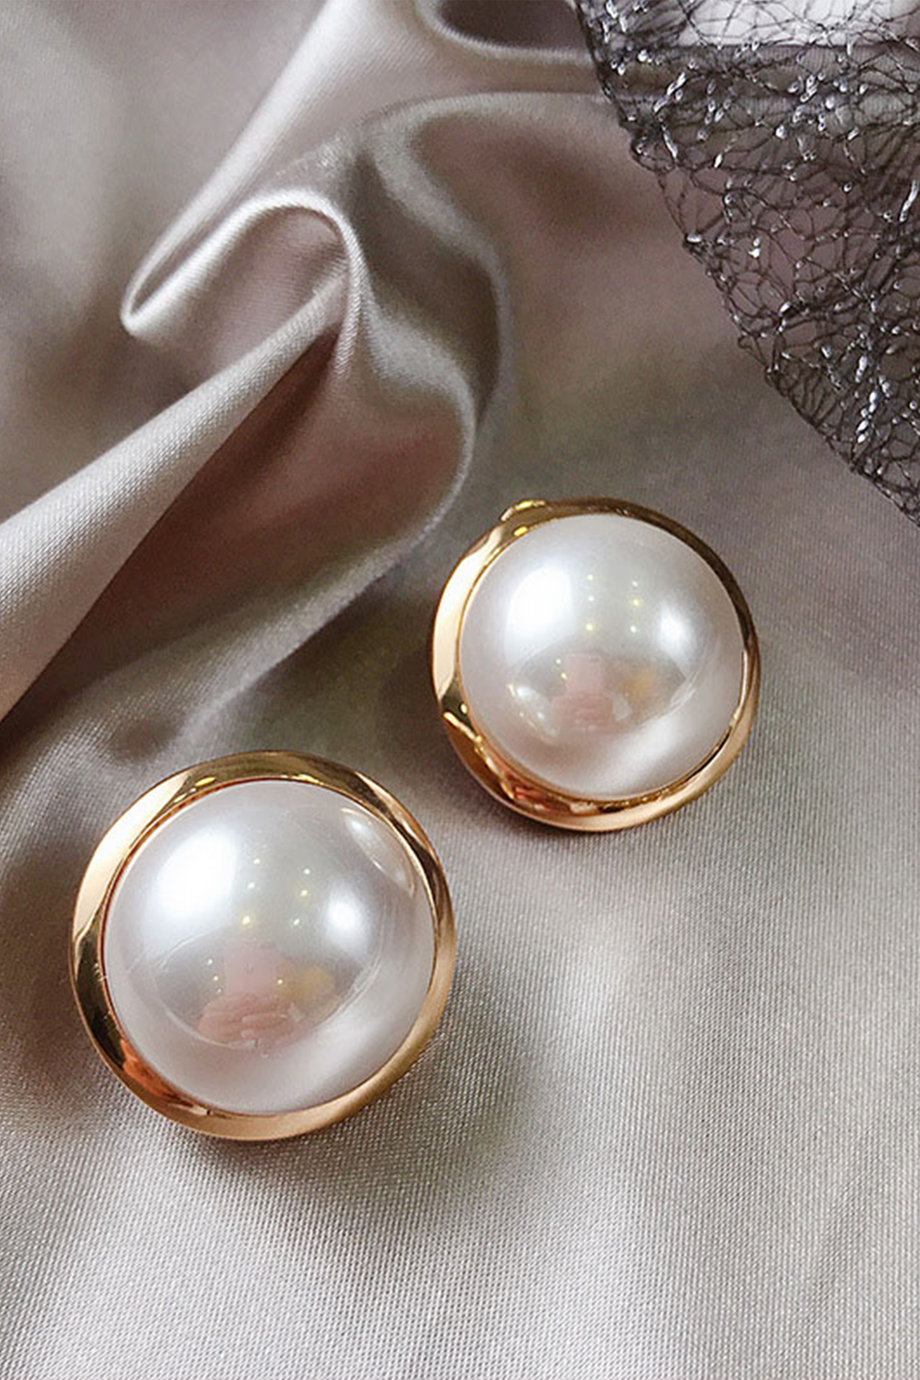 Buy Long White Pearl Earrings for Women and Girls | Fashion Long Dangler |  Accessories Jewellery for Women | Birthday Gift for Girls and Women  Anniversary Gift for Wife at Amazon.in